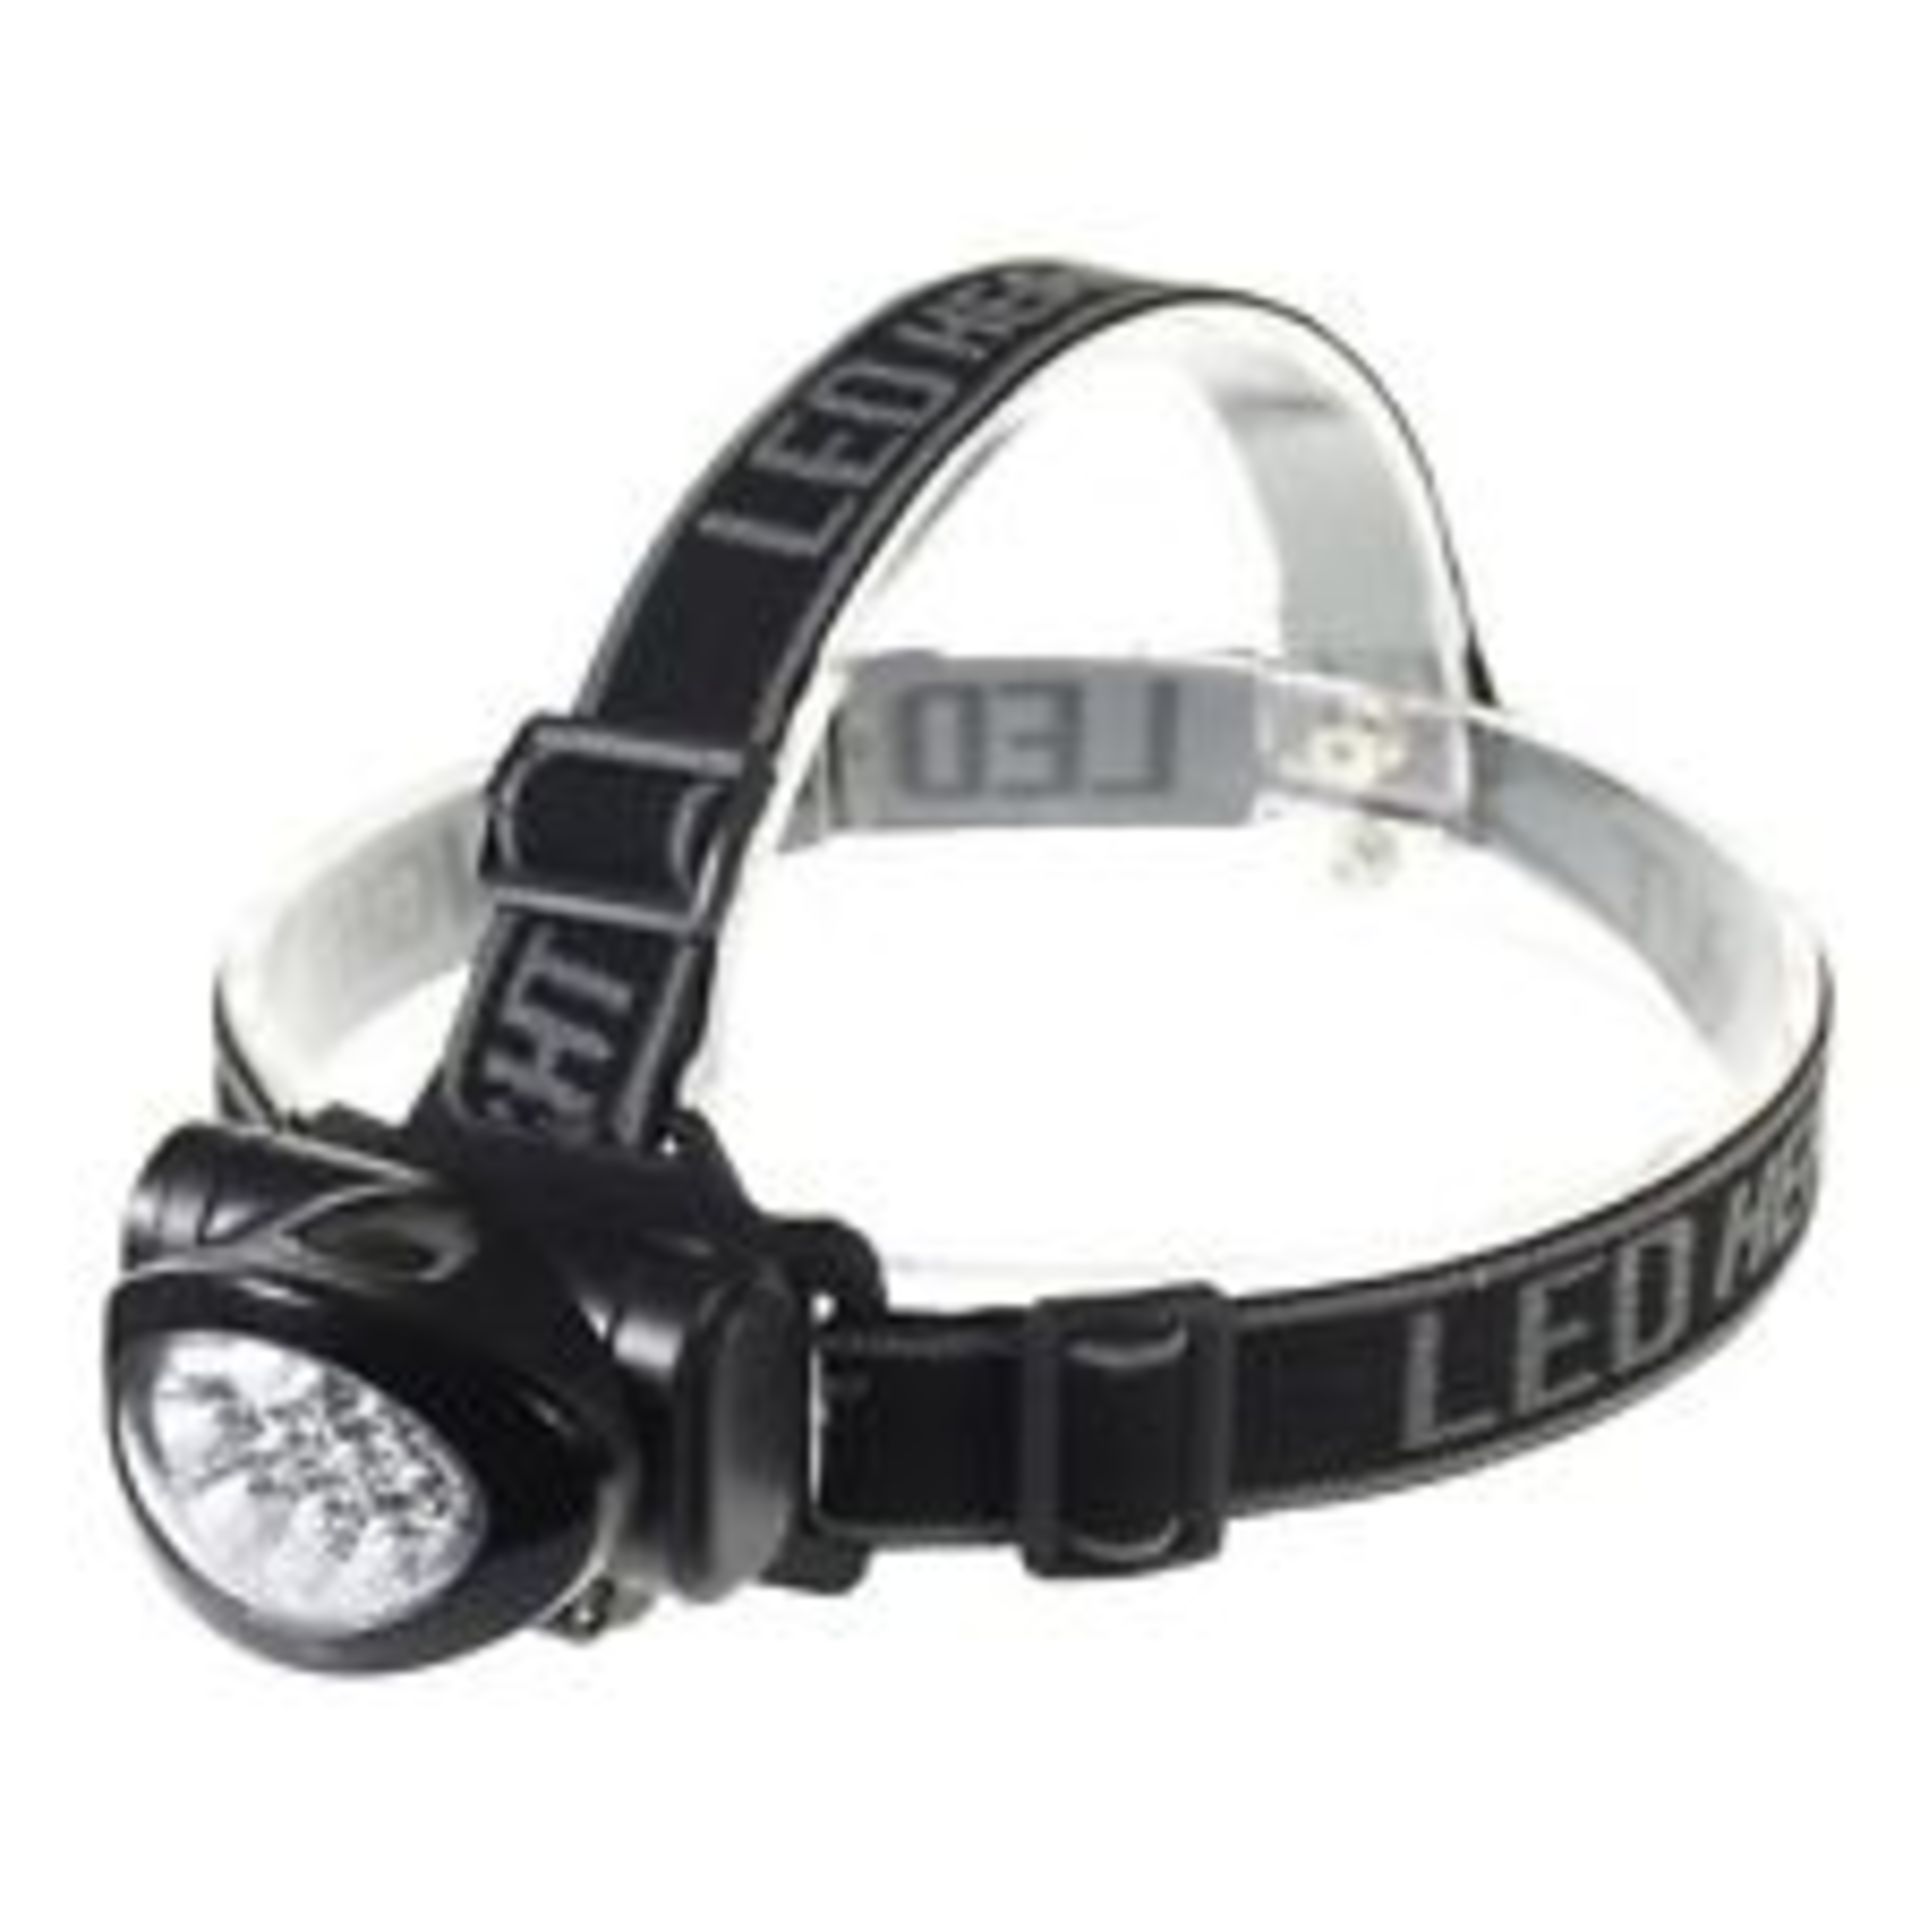 V Brand New Water Resistant-Adjustable Strap/Lamp-Battery-LED Lamp Head Lamp (Item May Vary From